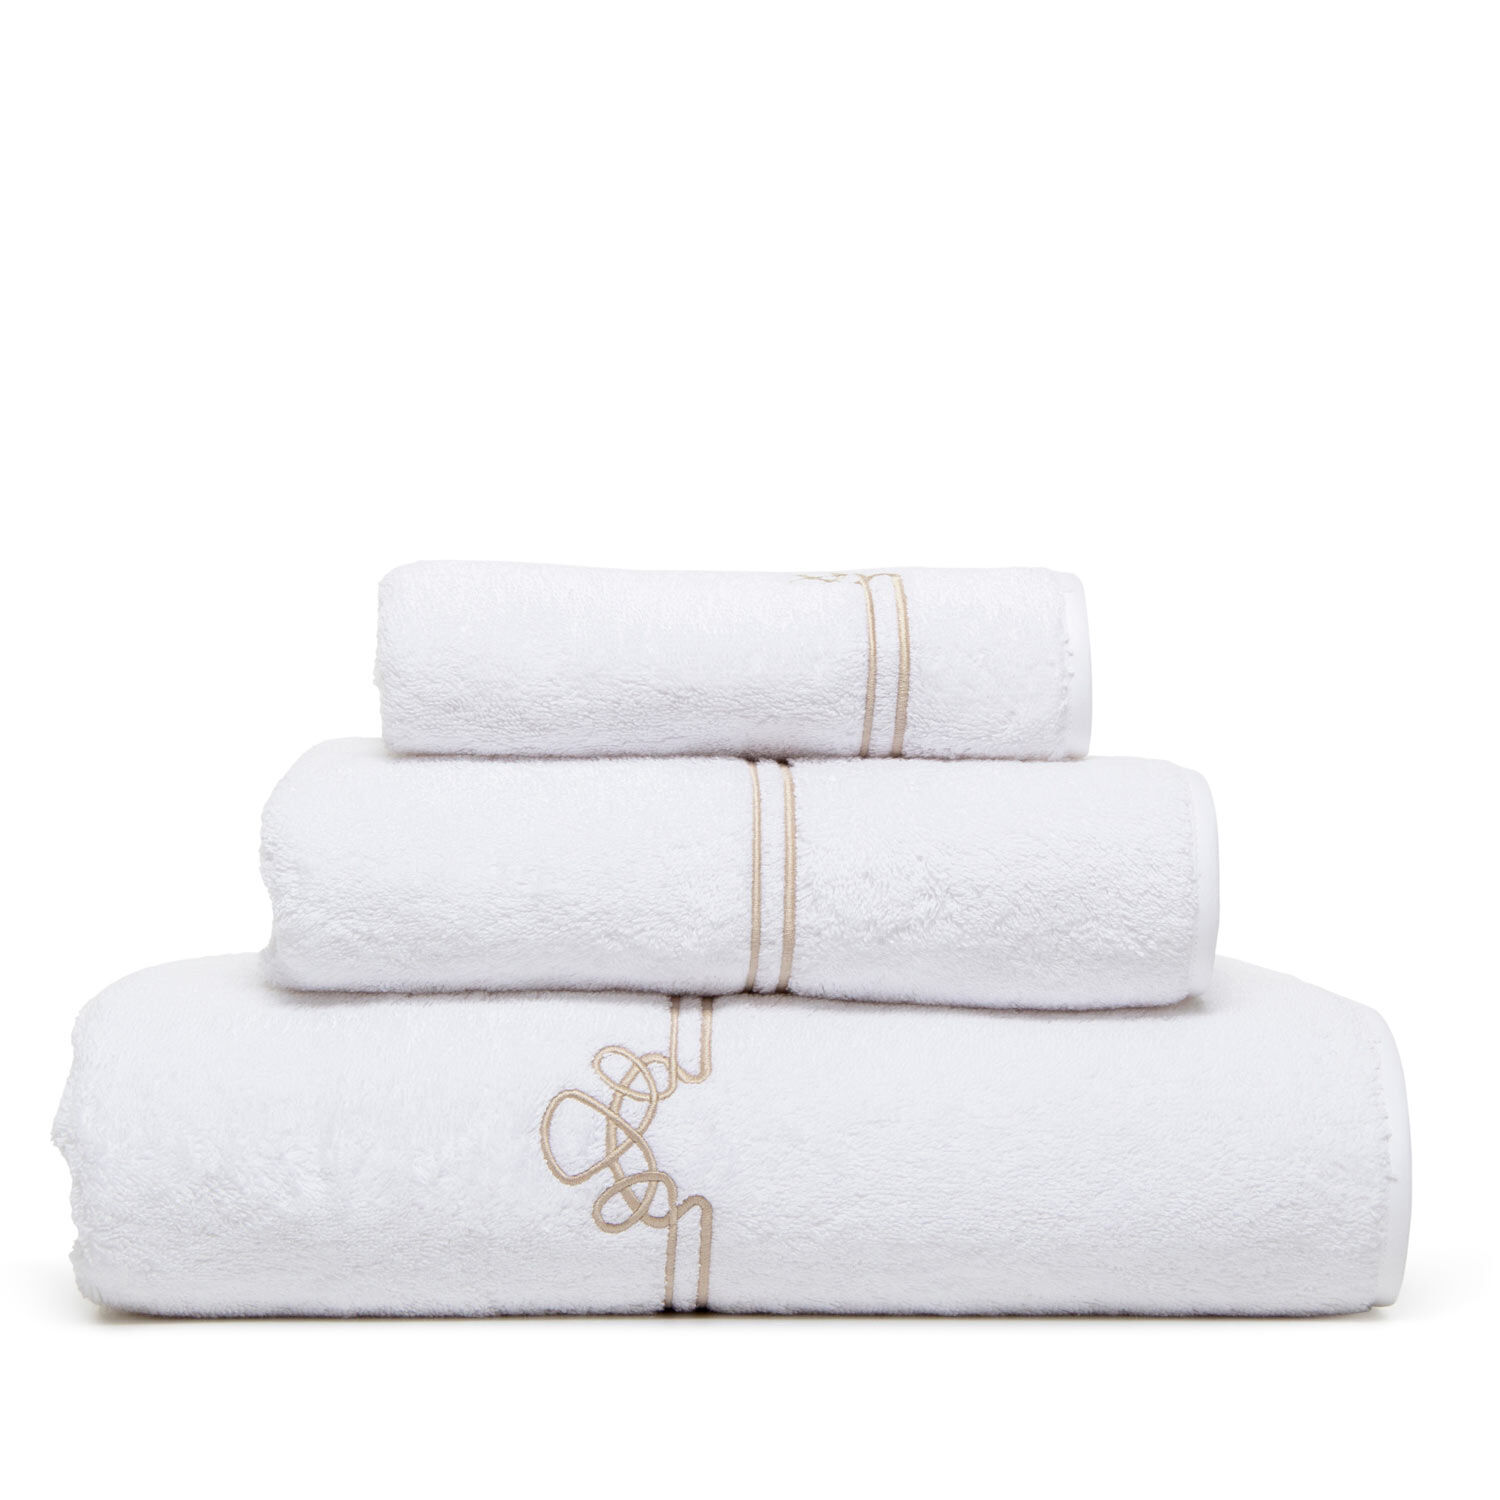 slide 1 Sirmione Embroidered Hand Towel